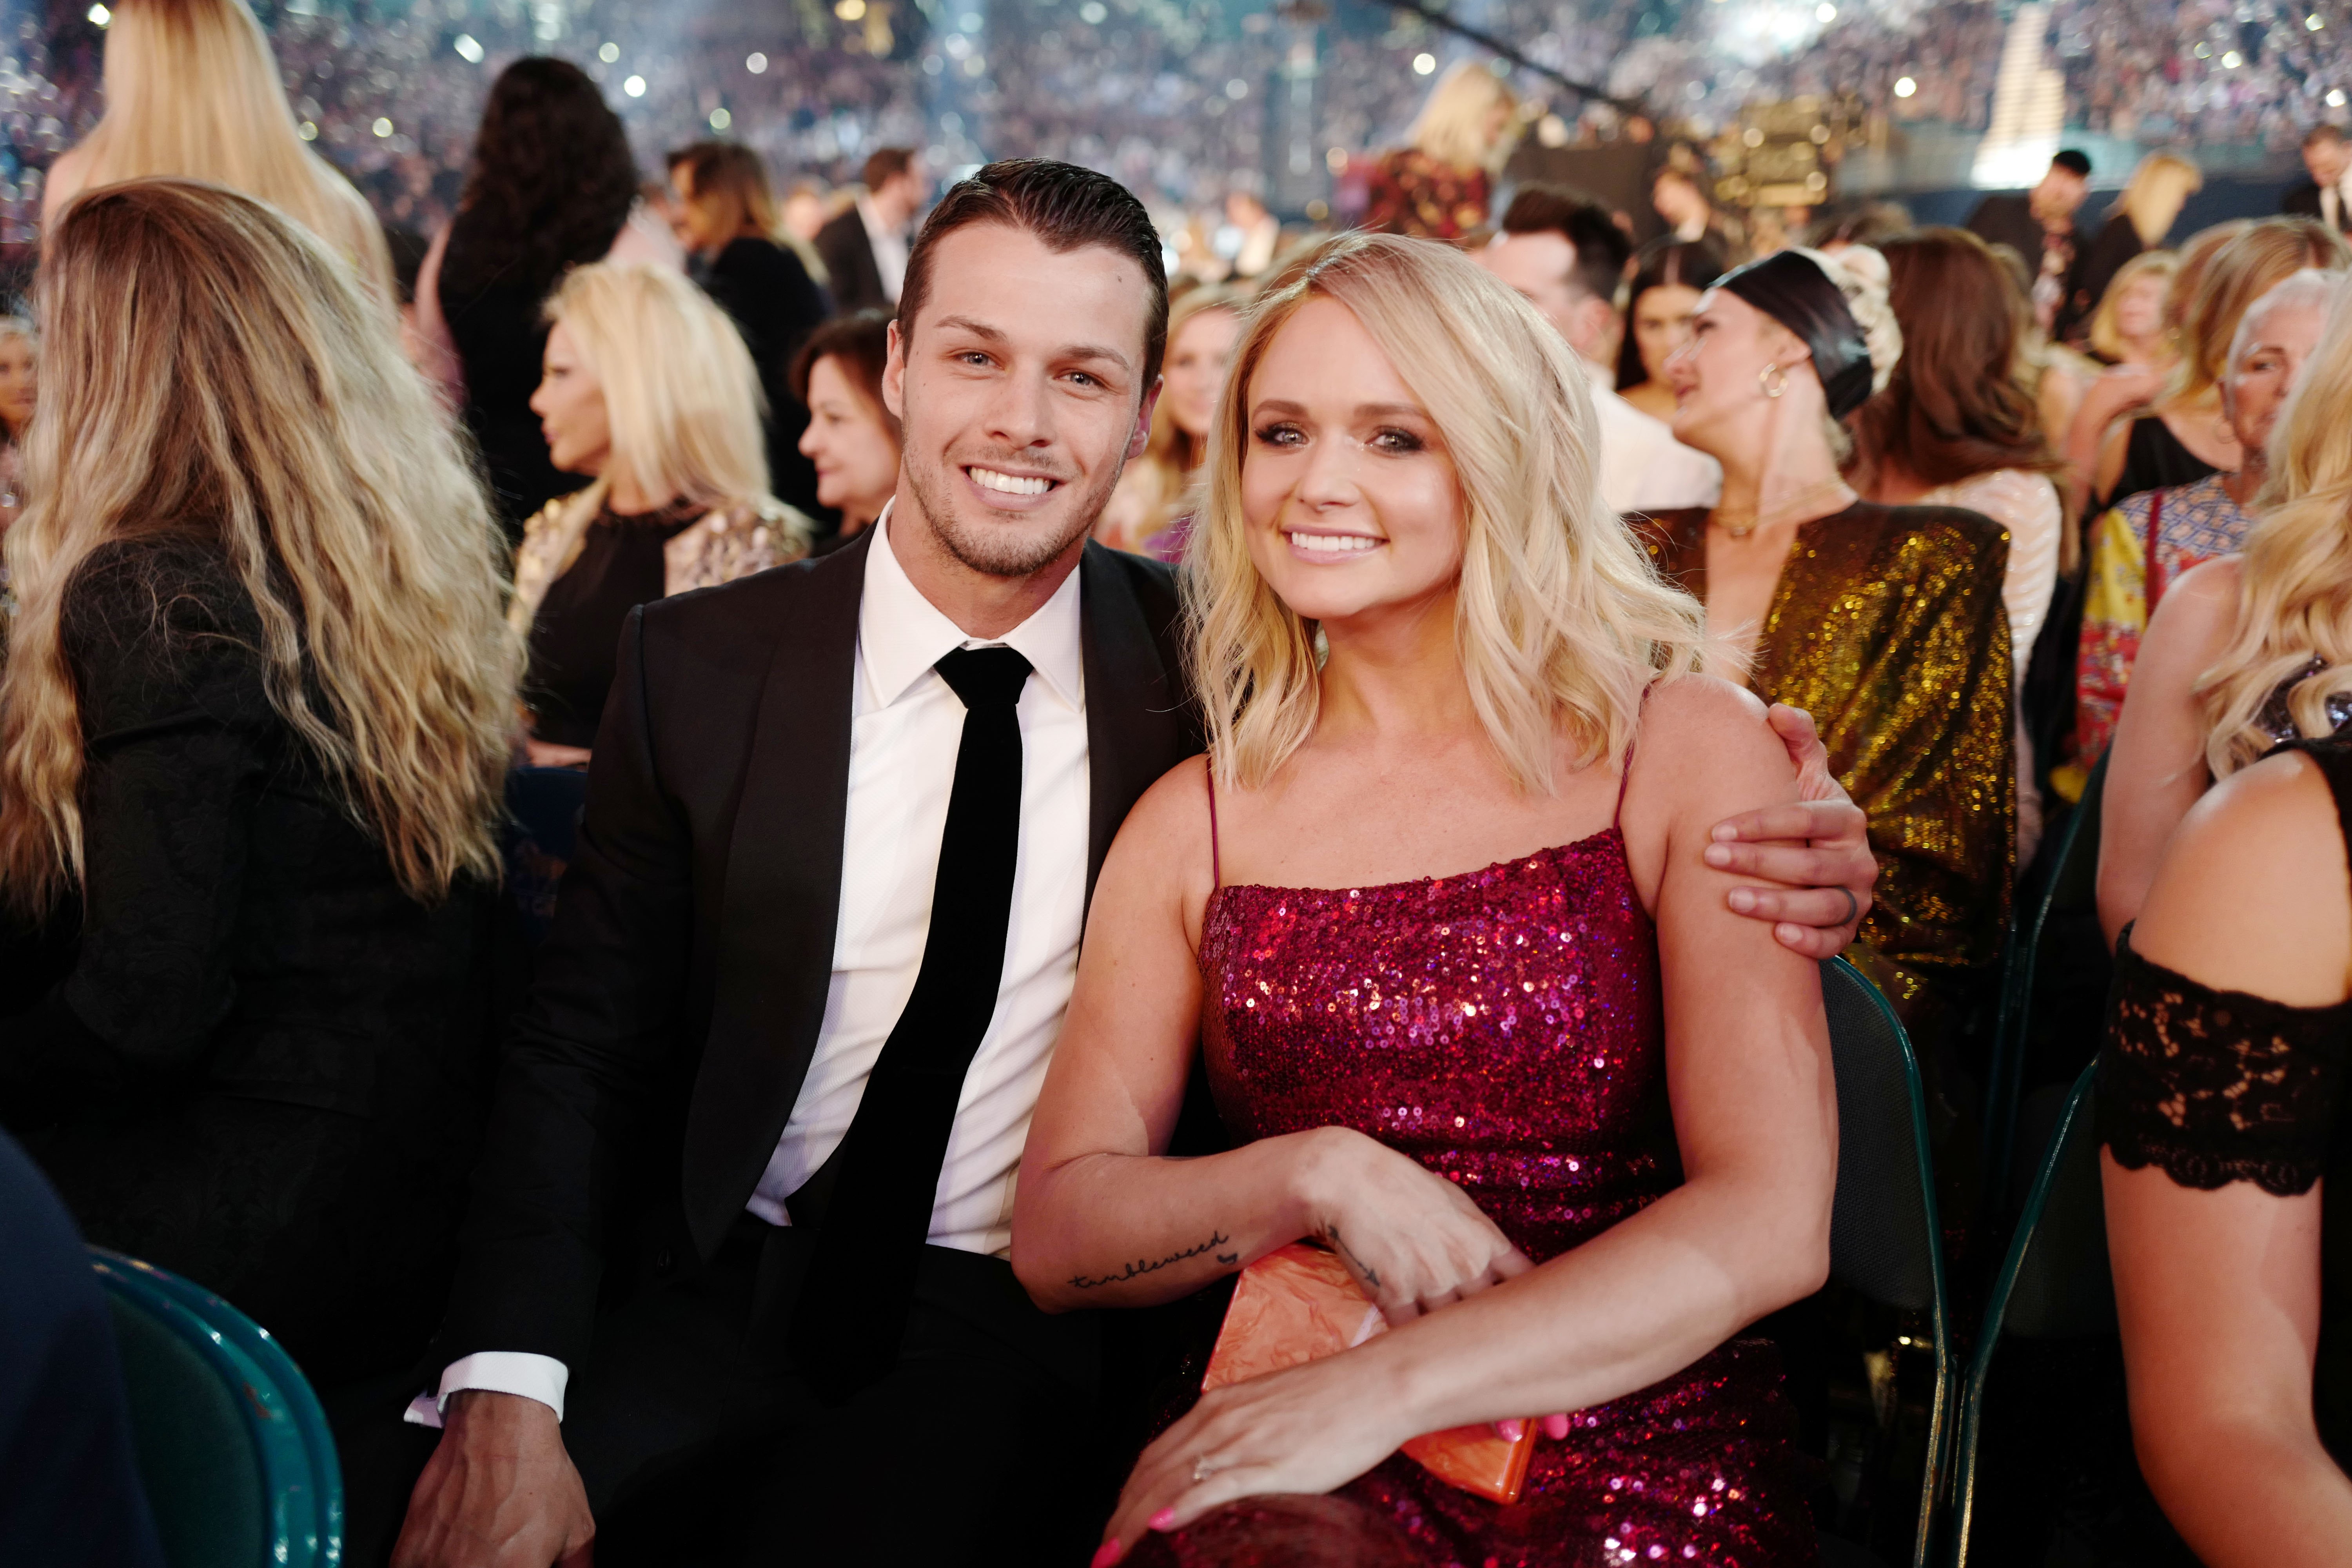 Brendan McLoughlin and Miranda Lambert attend the 54th Academy of Country Music Awards in Las Vegas, Nevada on April 7, 2019 | Photo: Getty Images